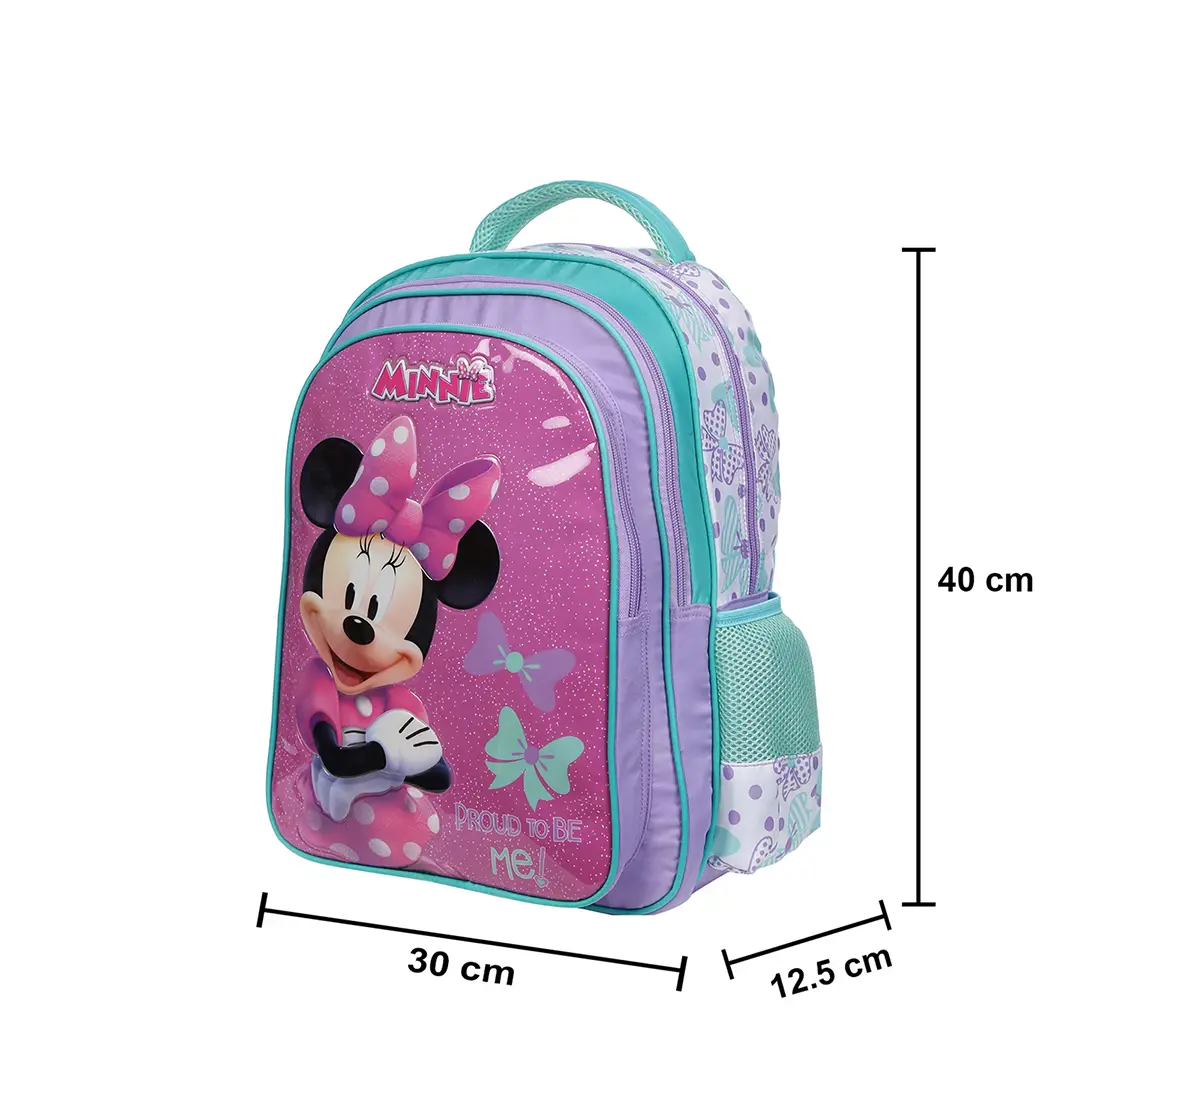 Disney Minnie Imaginative 16 Backpack Bags for age 3Y+ 